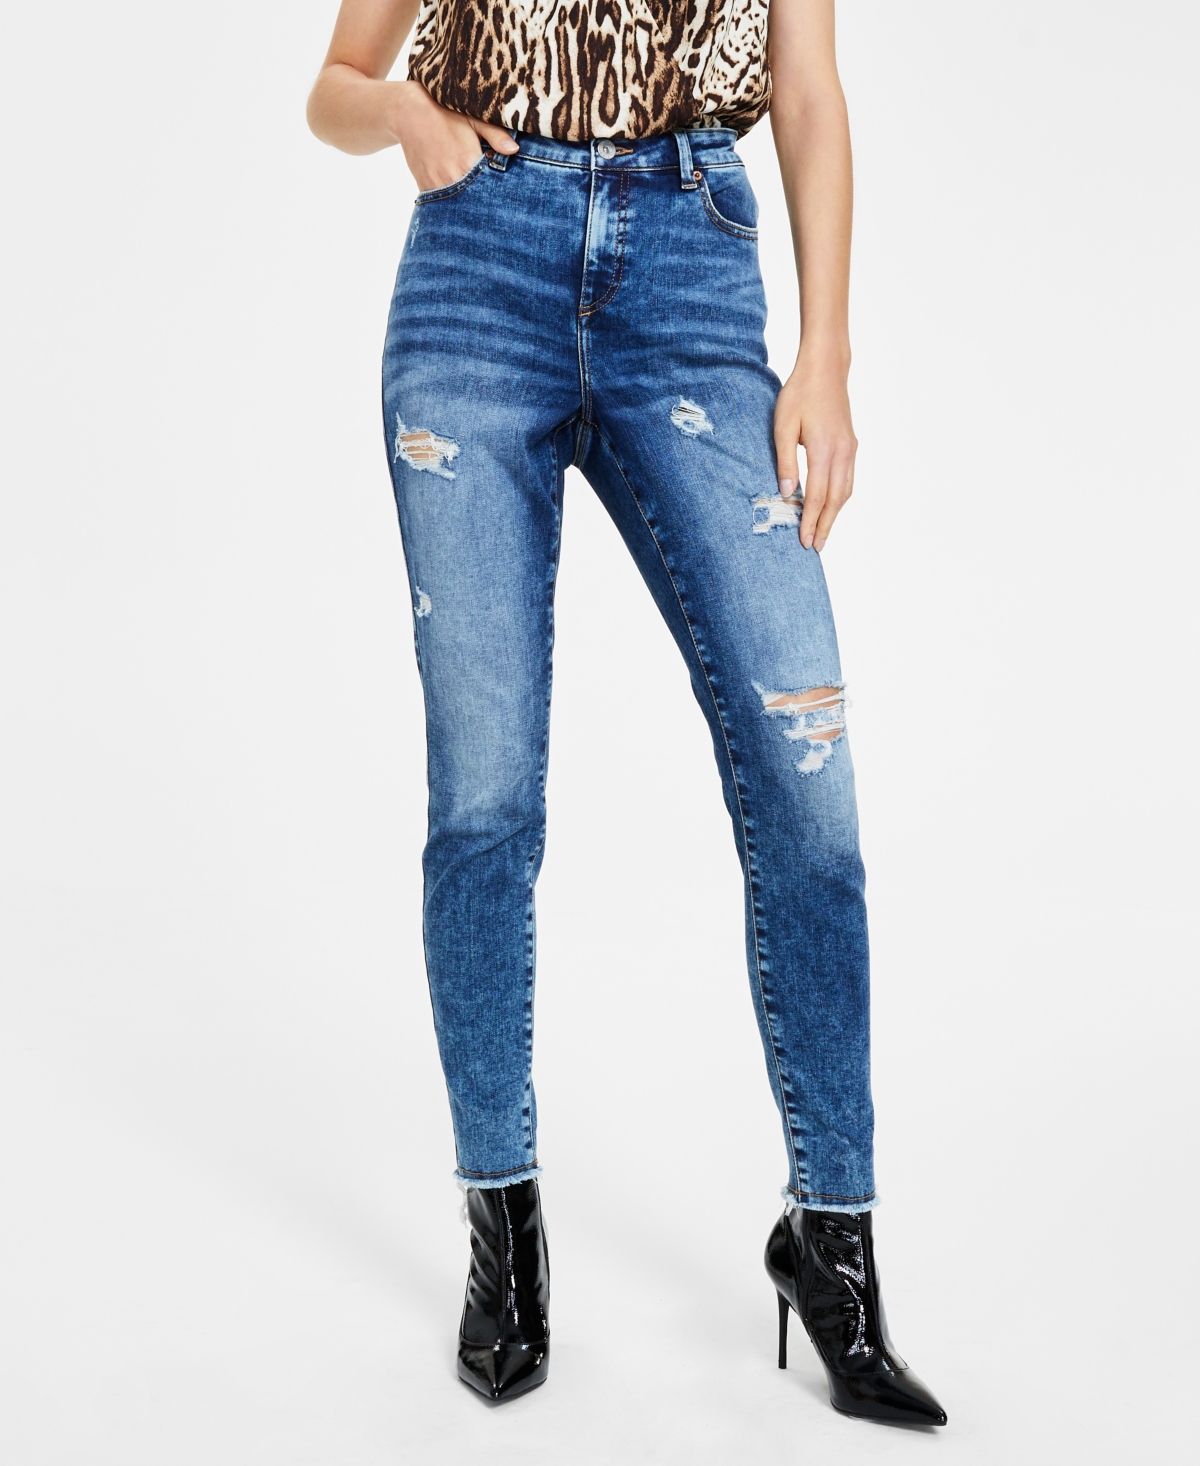  Inc International Concepts Women's High-Rise Destructed Skinny Jeans, Created for Macy's